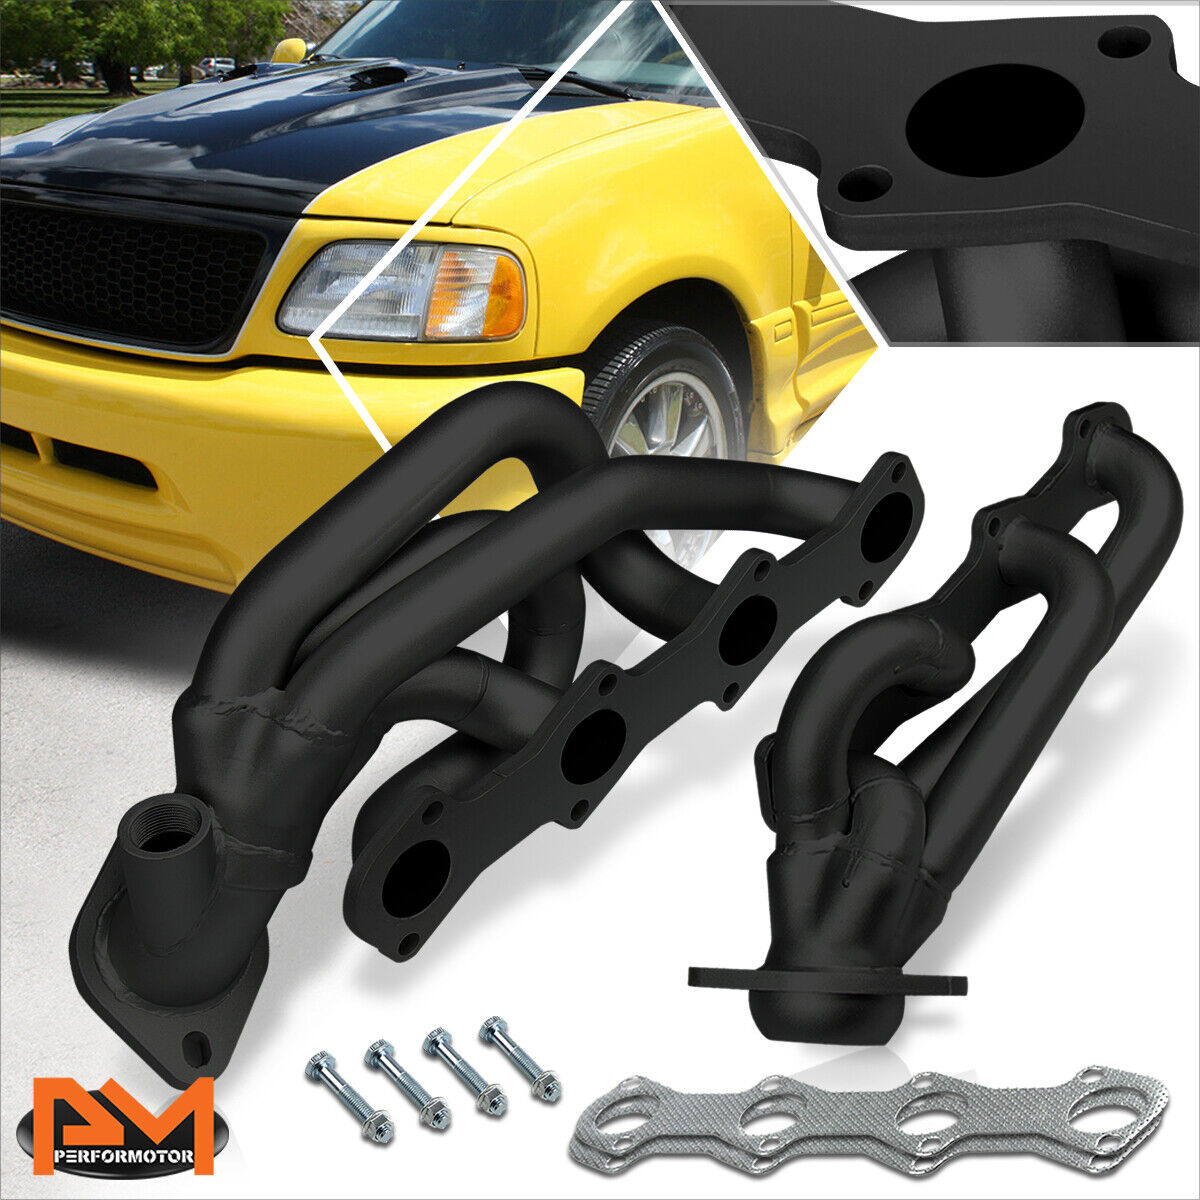 For 97-03 Ford F150/F250/Expedition 5.4 V8 Black Steel 4-1 Racing Exhaust Header